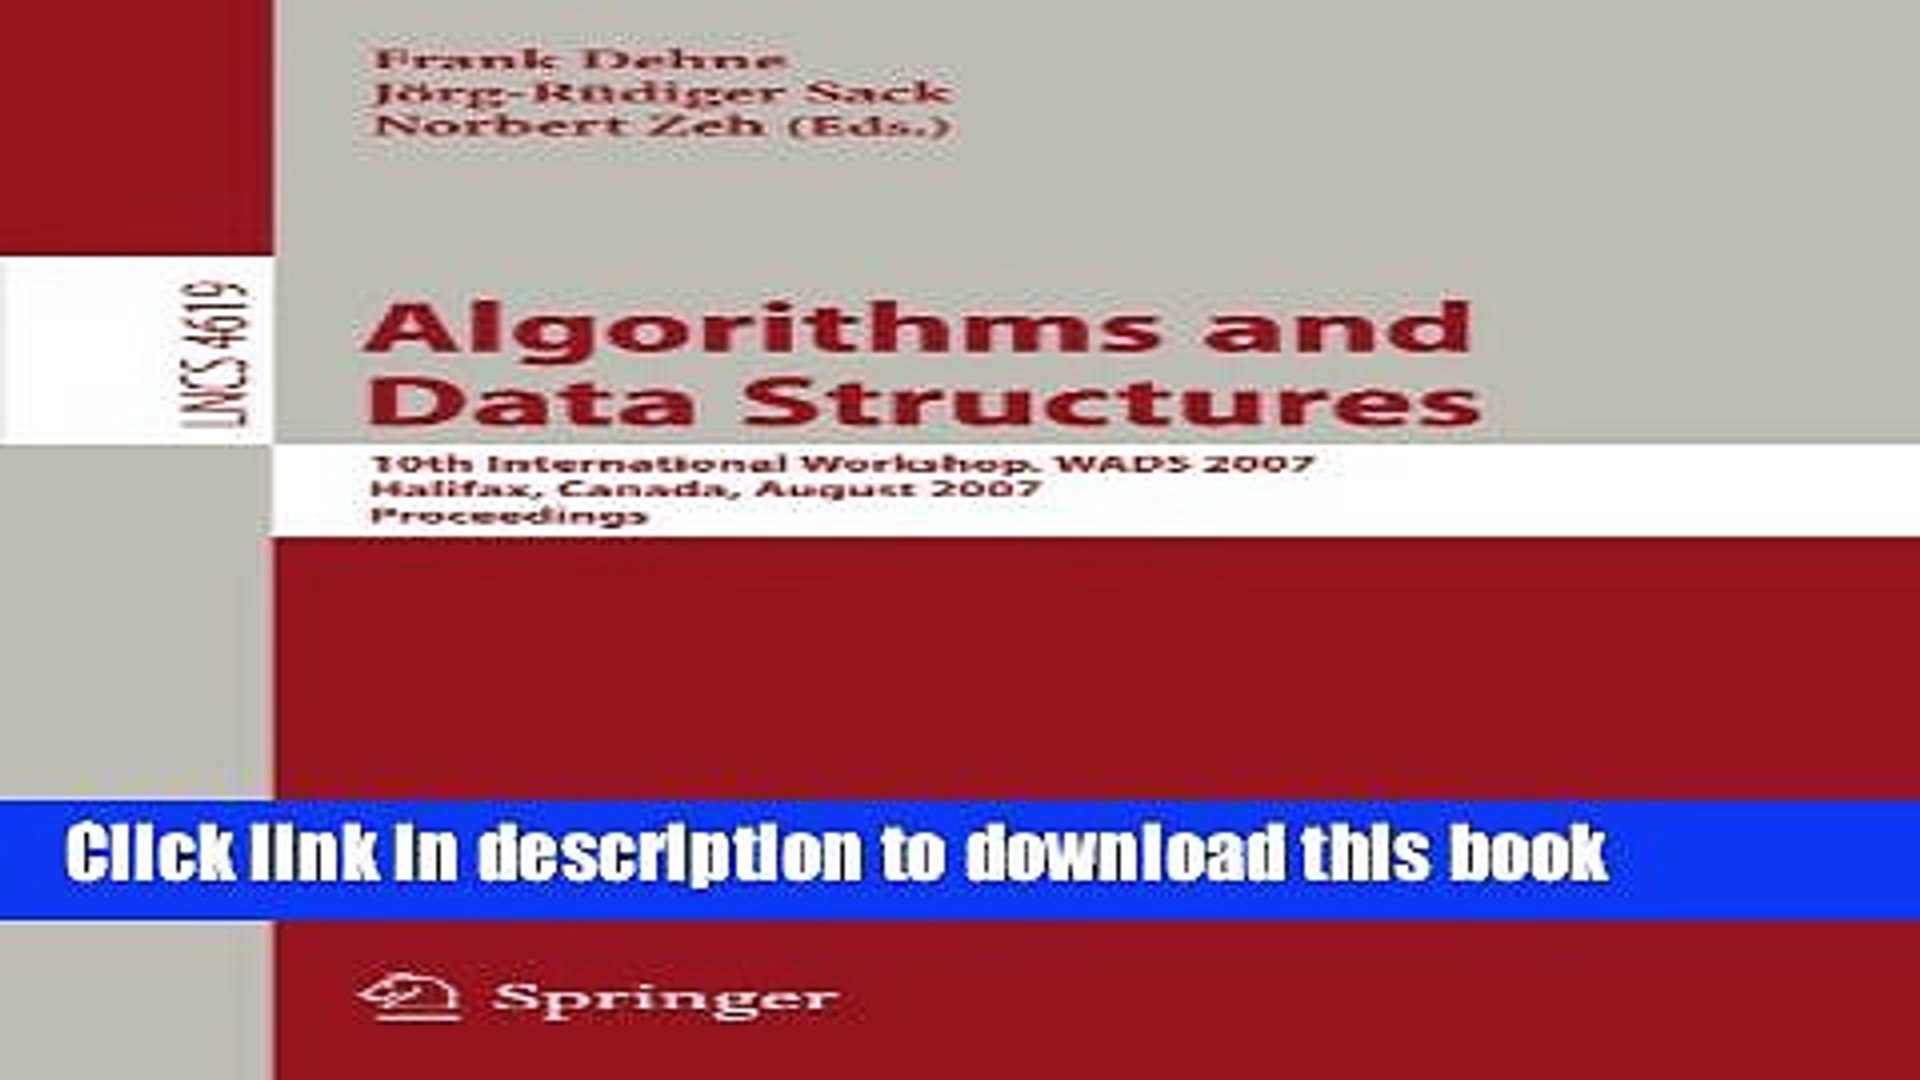 Read Algorithms and Data Structures: 10th International Workshop, WADS 2007, Halifax, Canada,